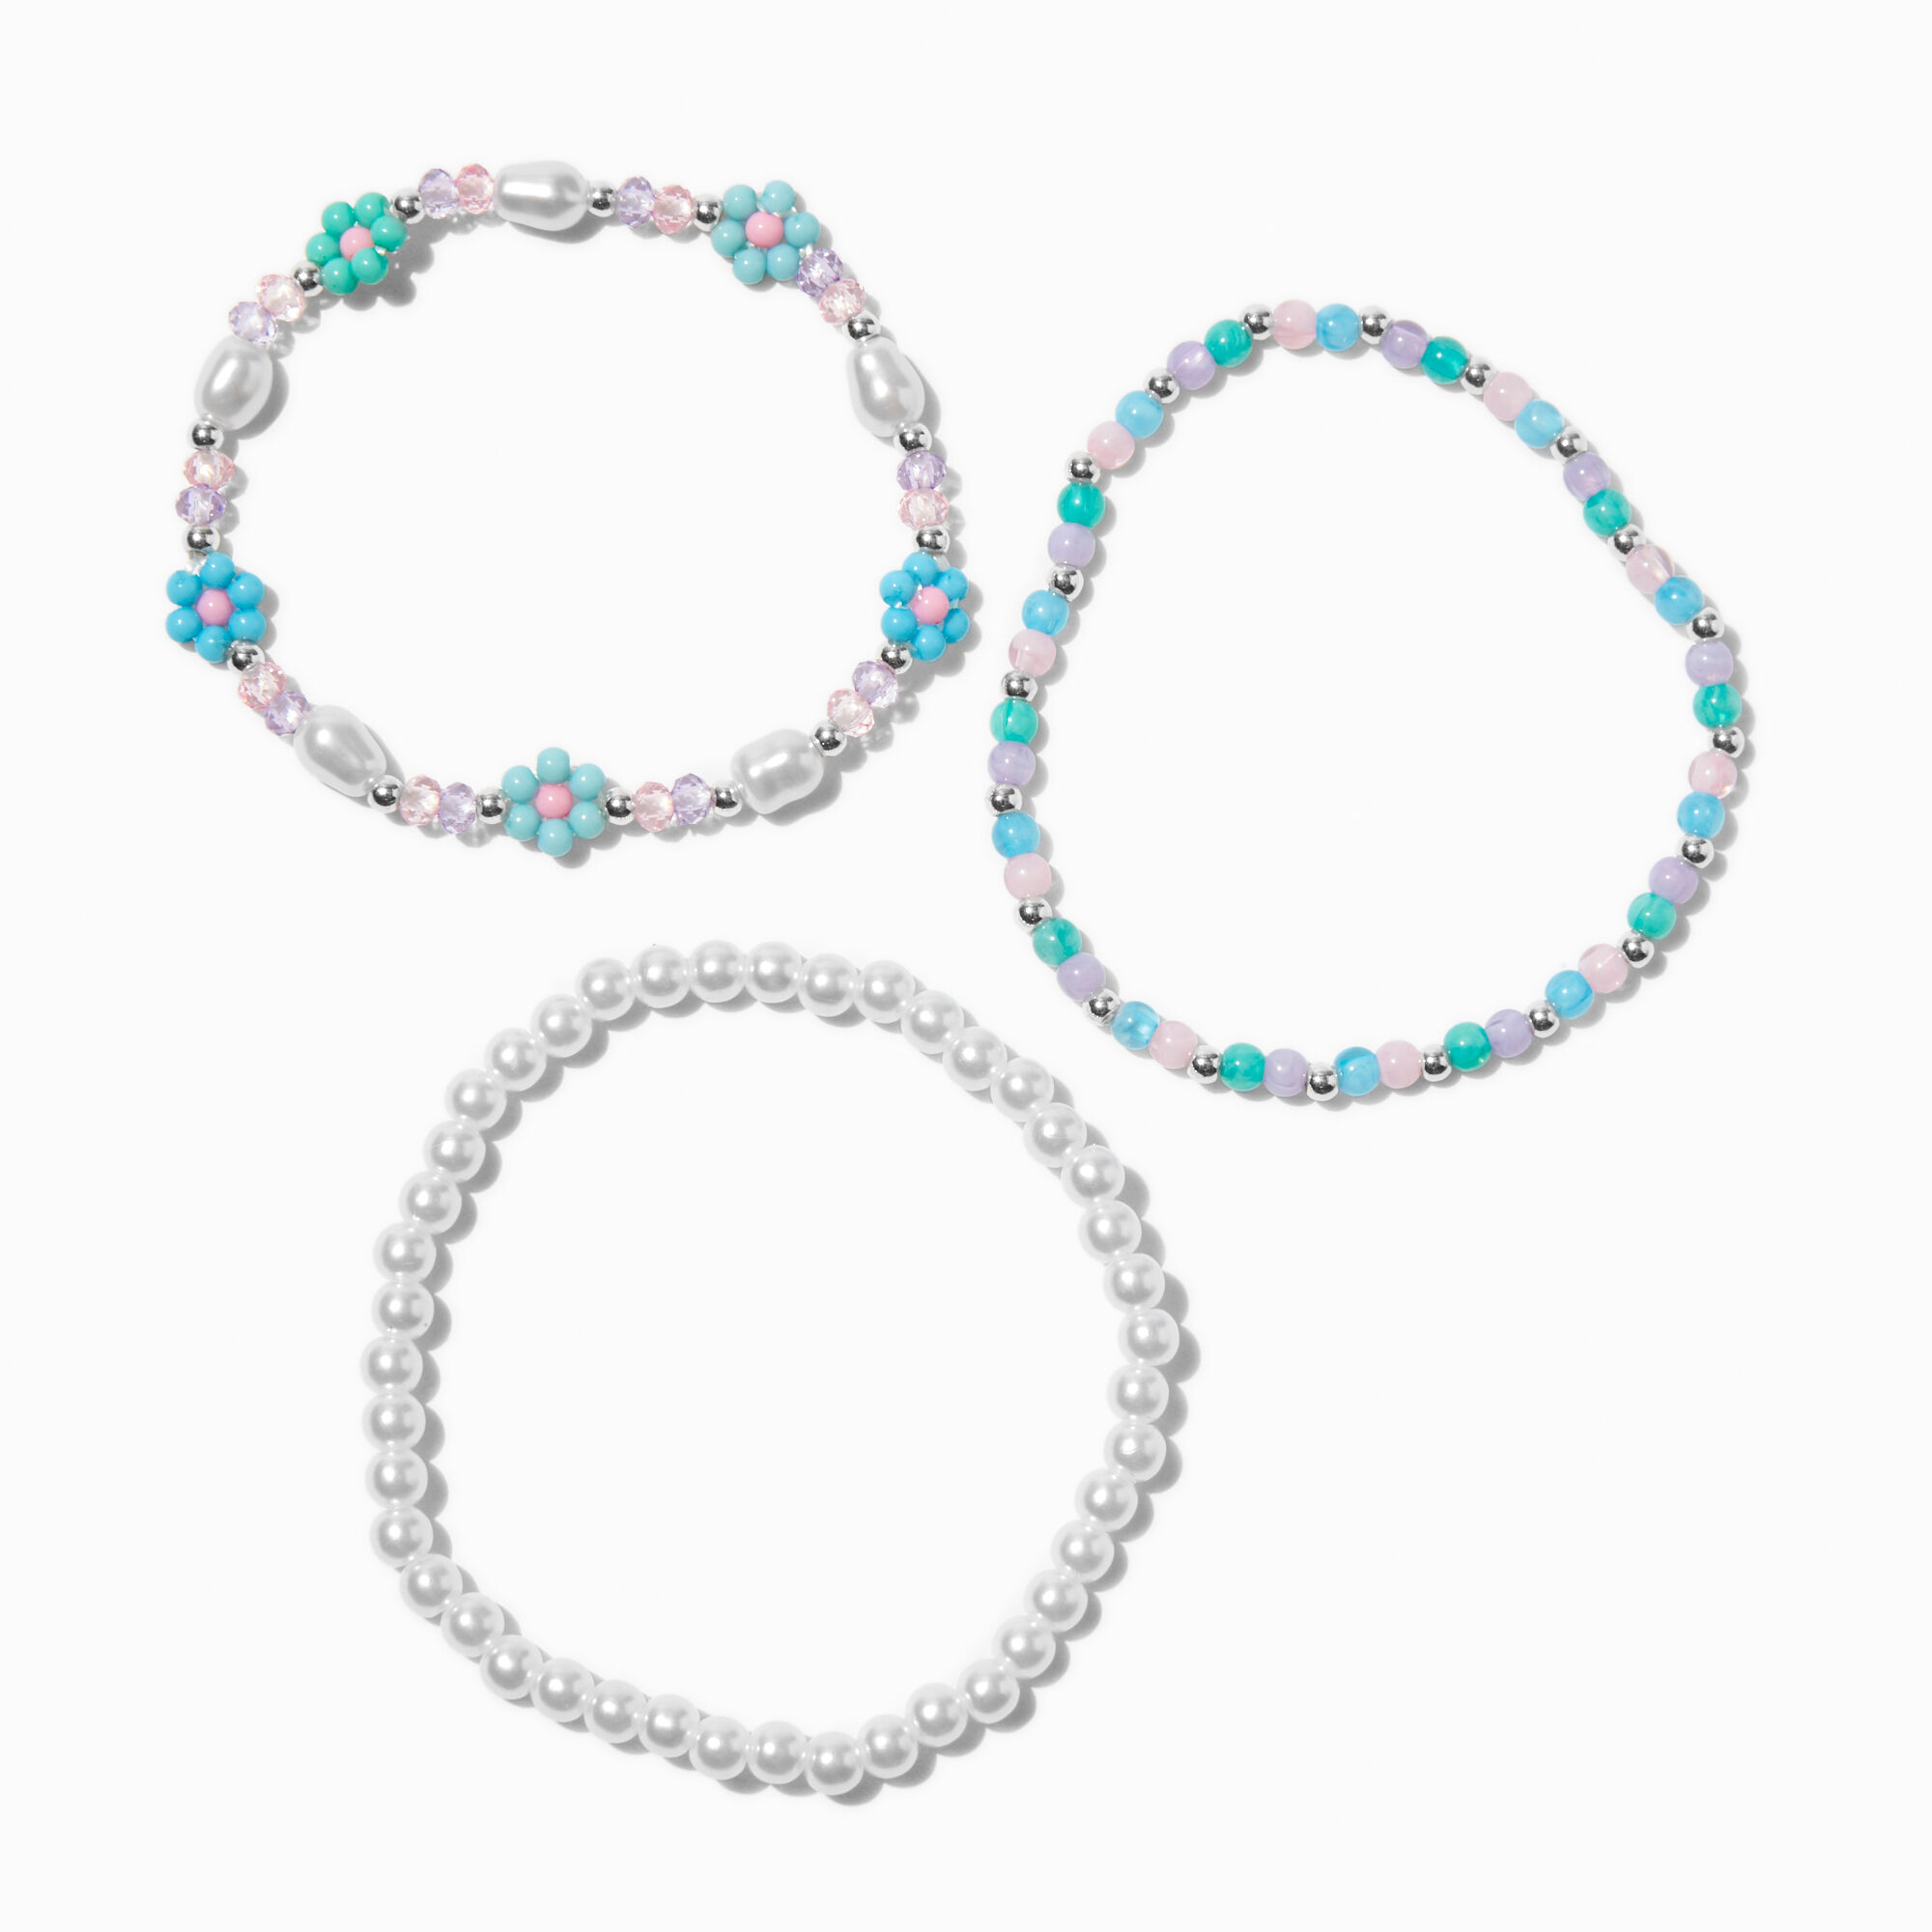 View Claires Club Mermaid Floral Beaded Anklets 3 Pack information